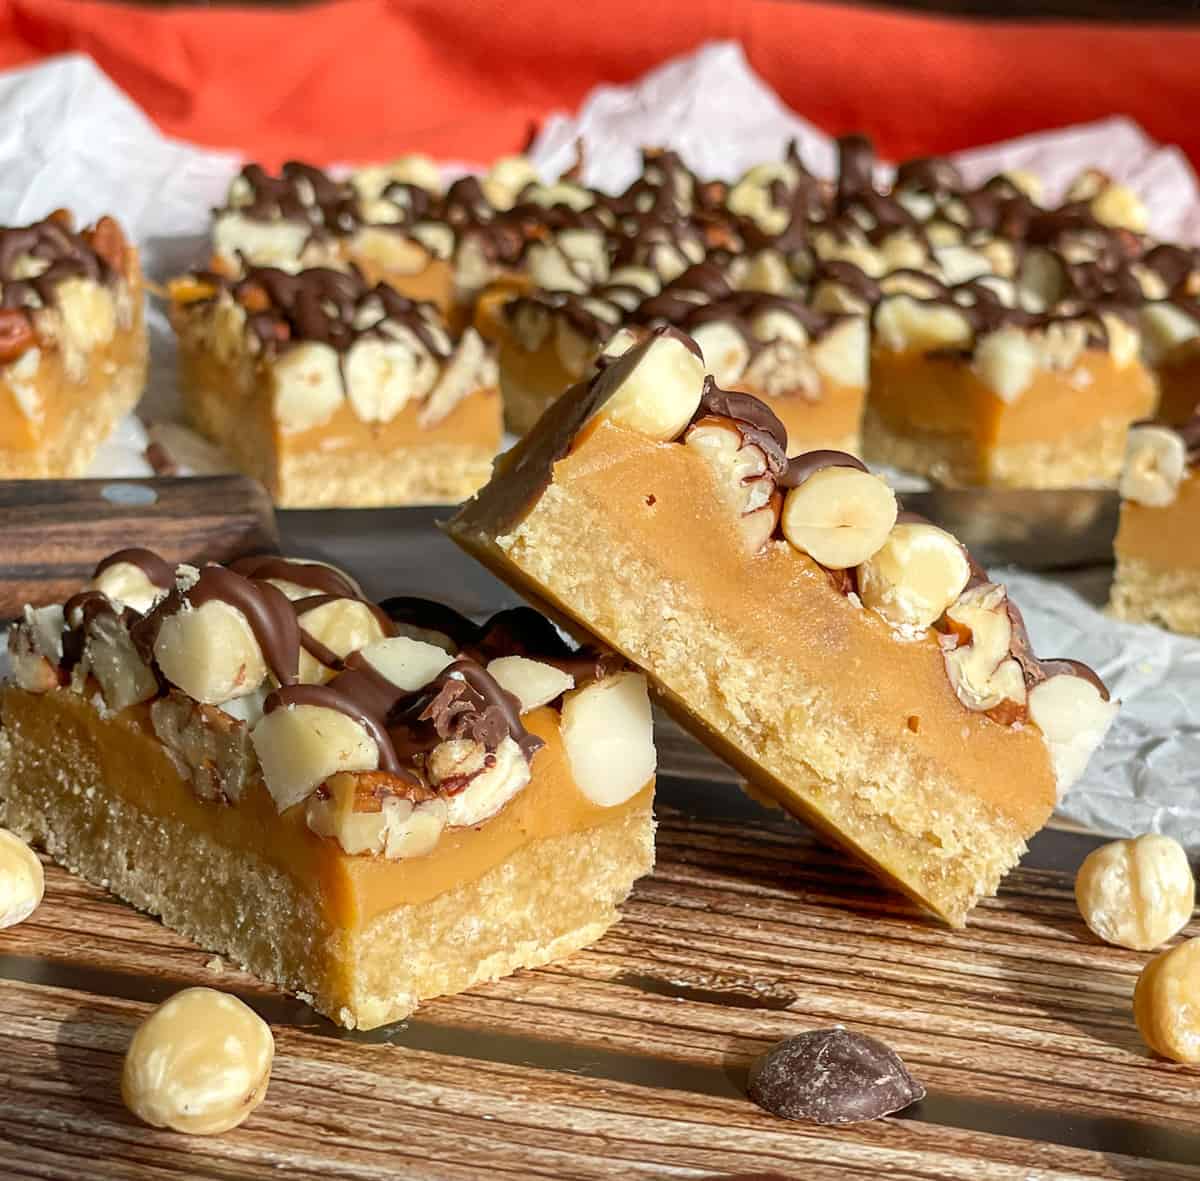 Pieces of caramel nut slice, drizzled with chocolate topping